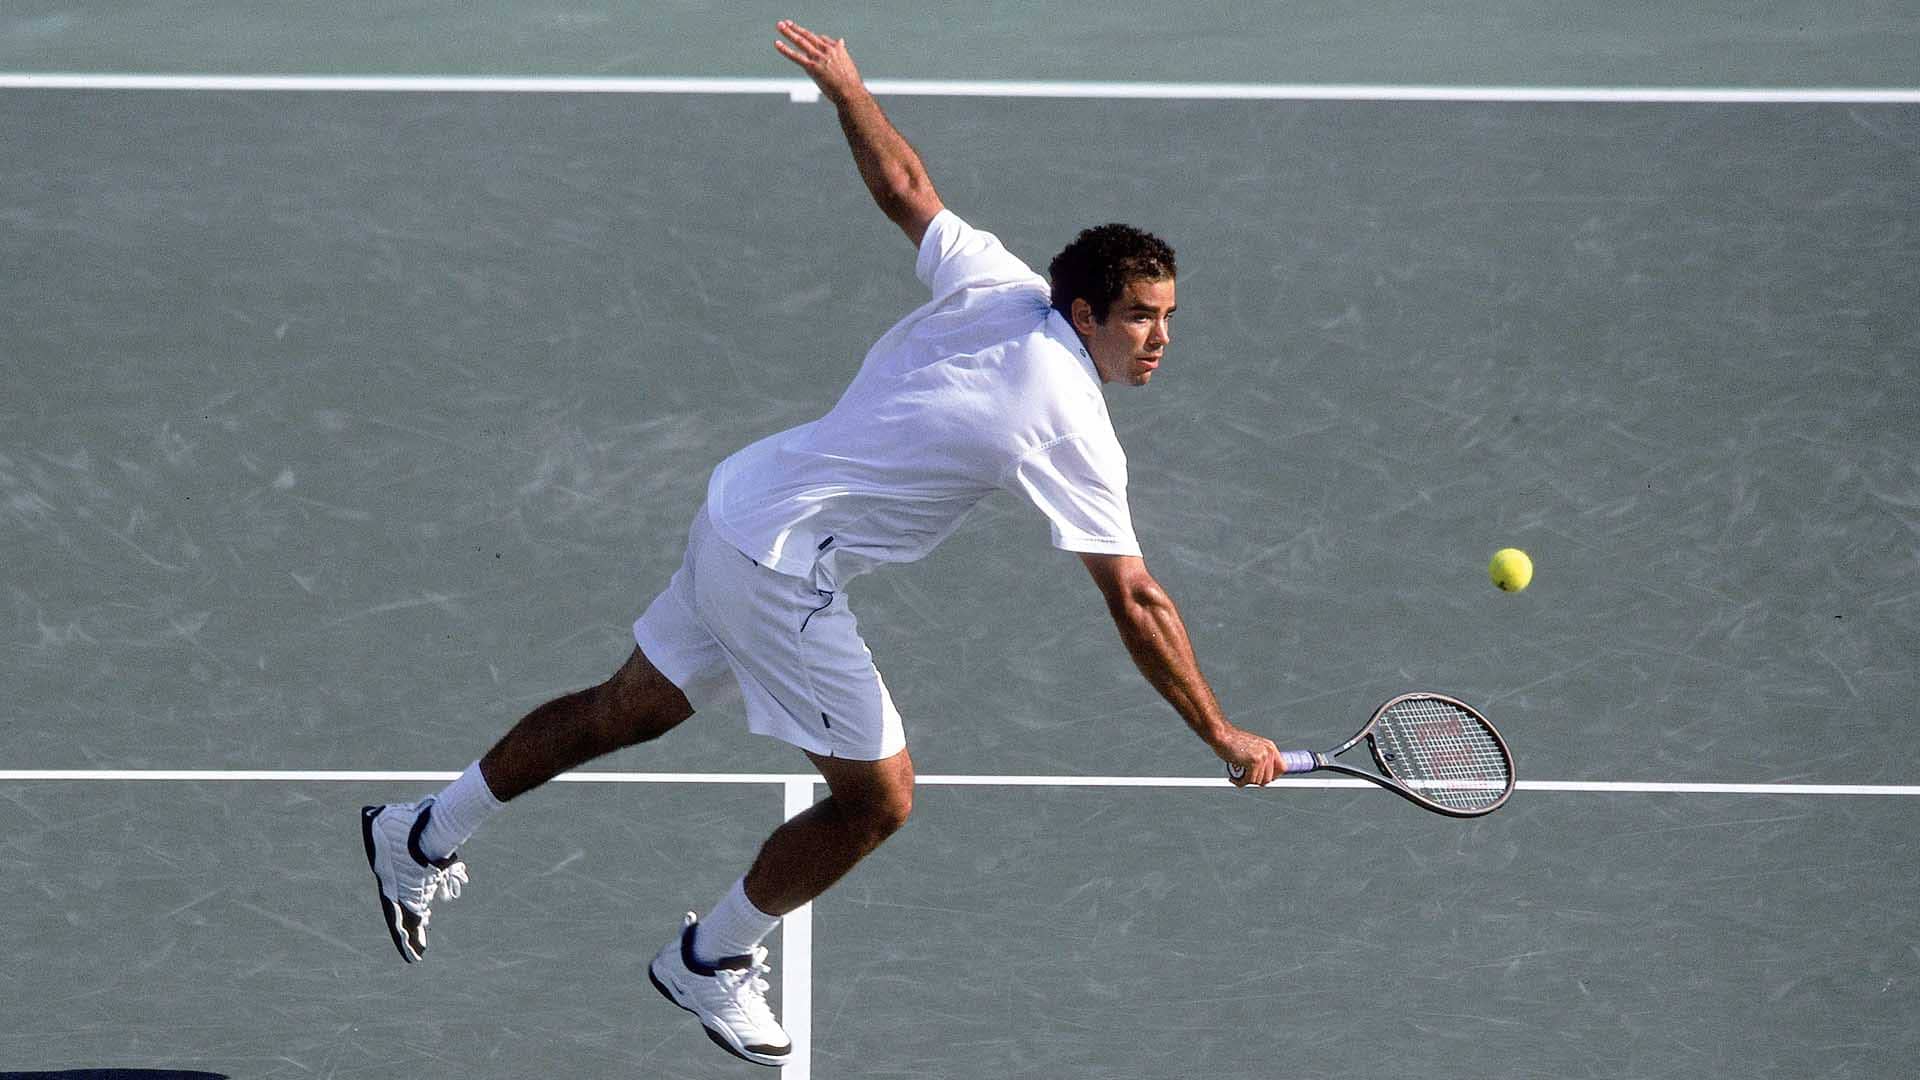 <a href='https://www.atptour.com/en/players/pete-sampras/s402/overview'>Pete Sampras</a> claims his final ATP Masters 1000 title in Miami in 2000.